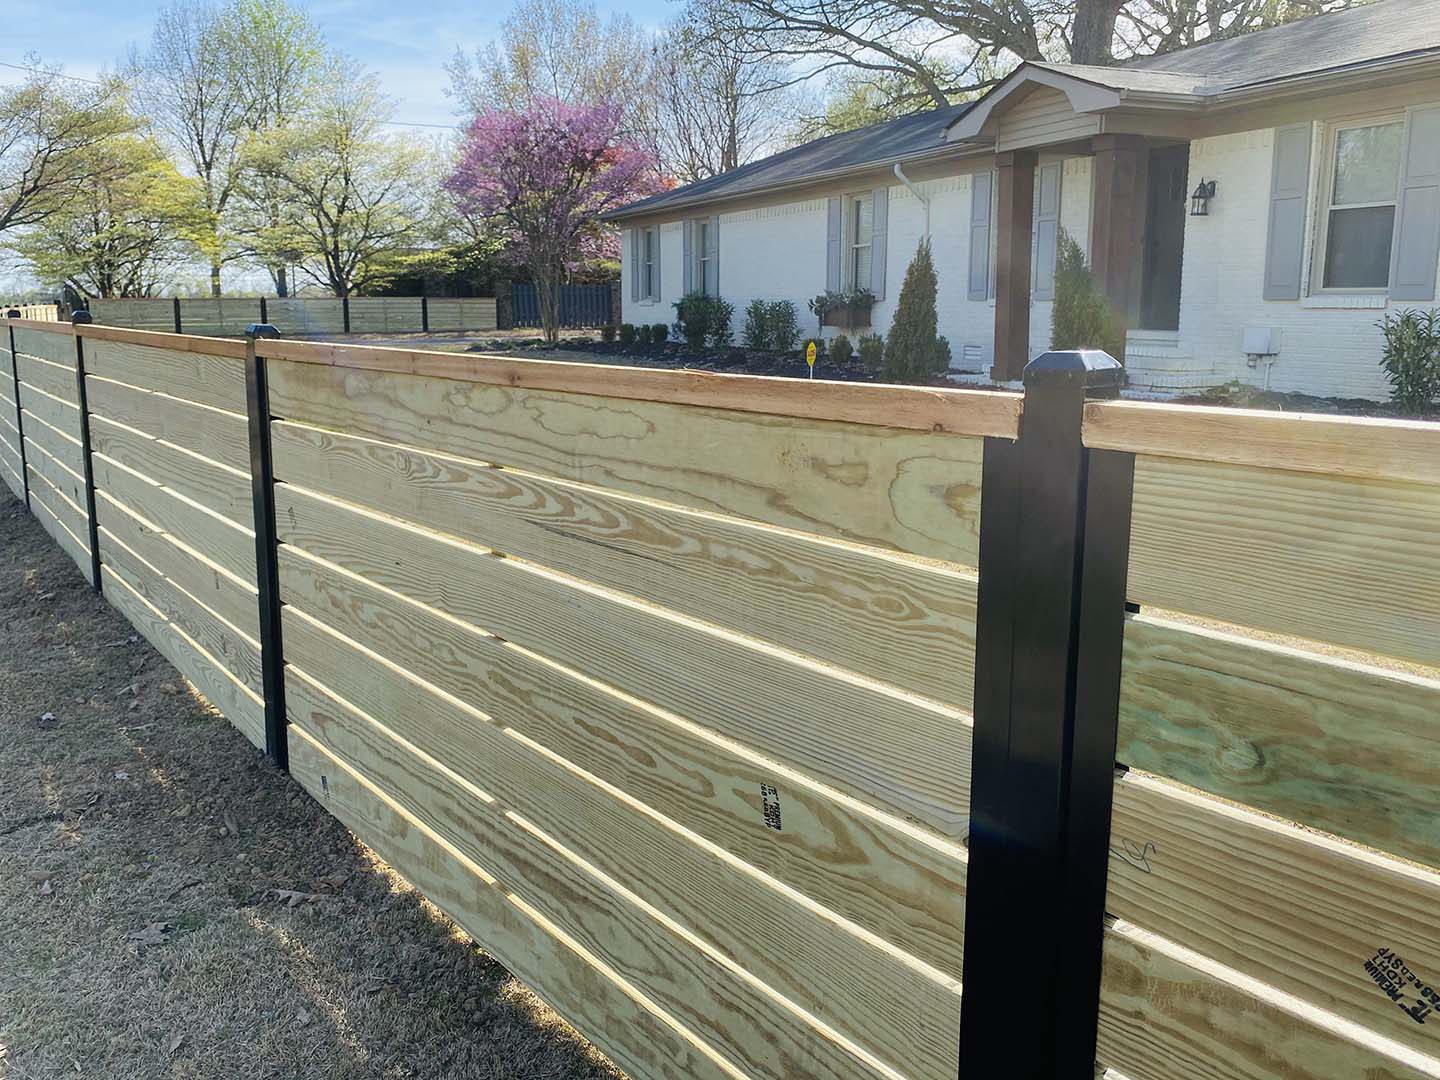  Lexington Tennessee residential fencing company